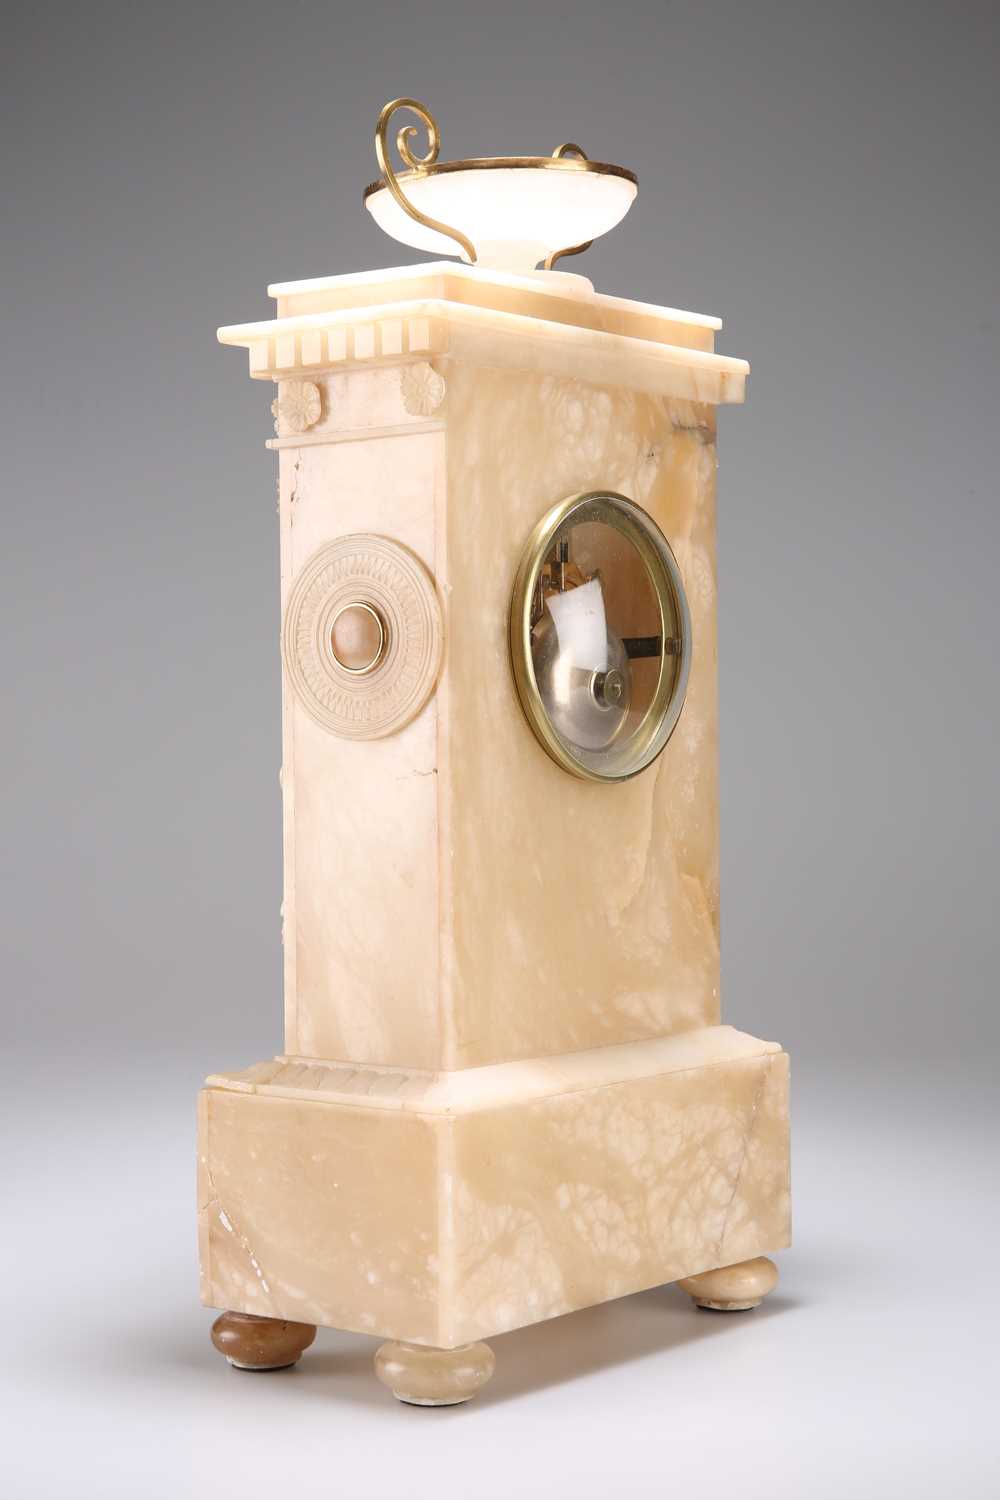 A FRENCH ALABASTER MANTEL CLOCK, 19TH CENTURY - Image 2 of 2